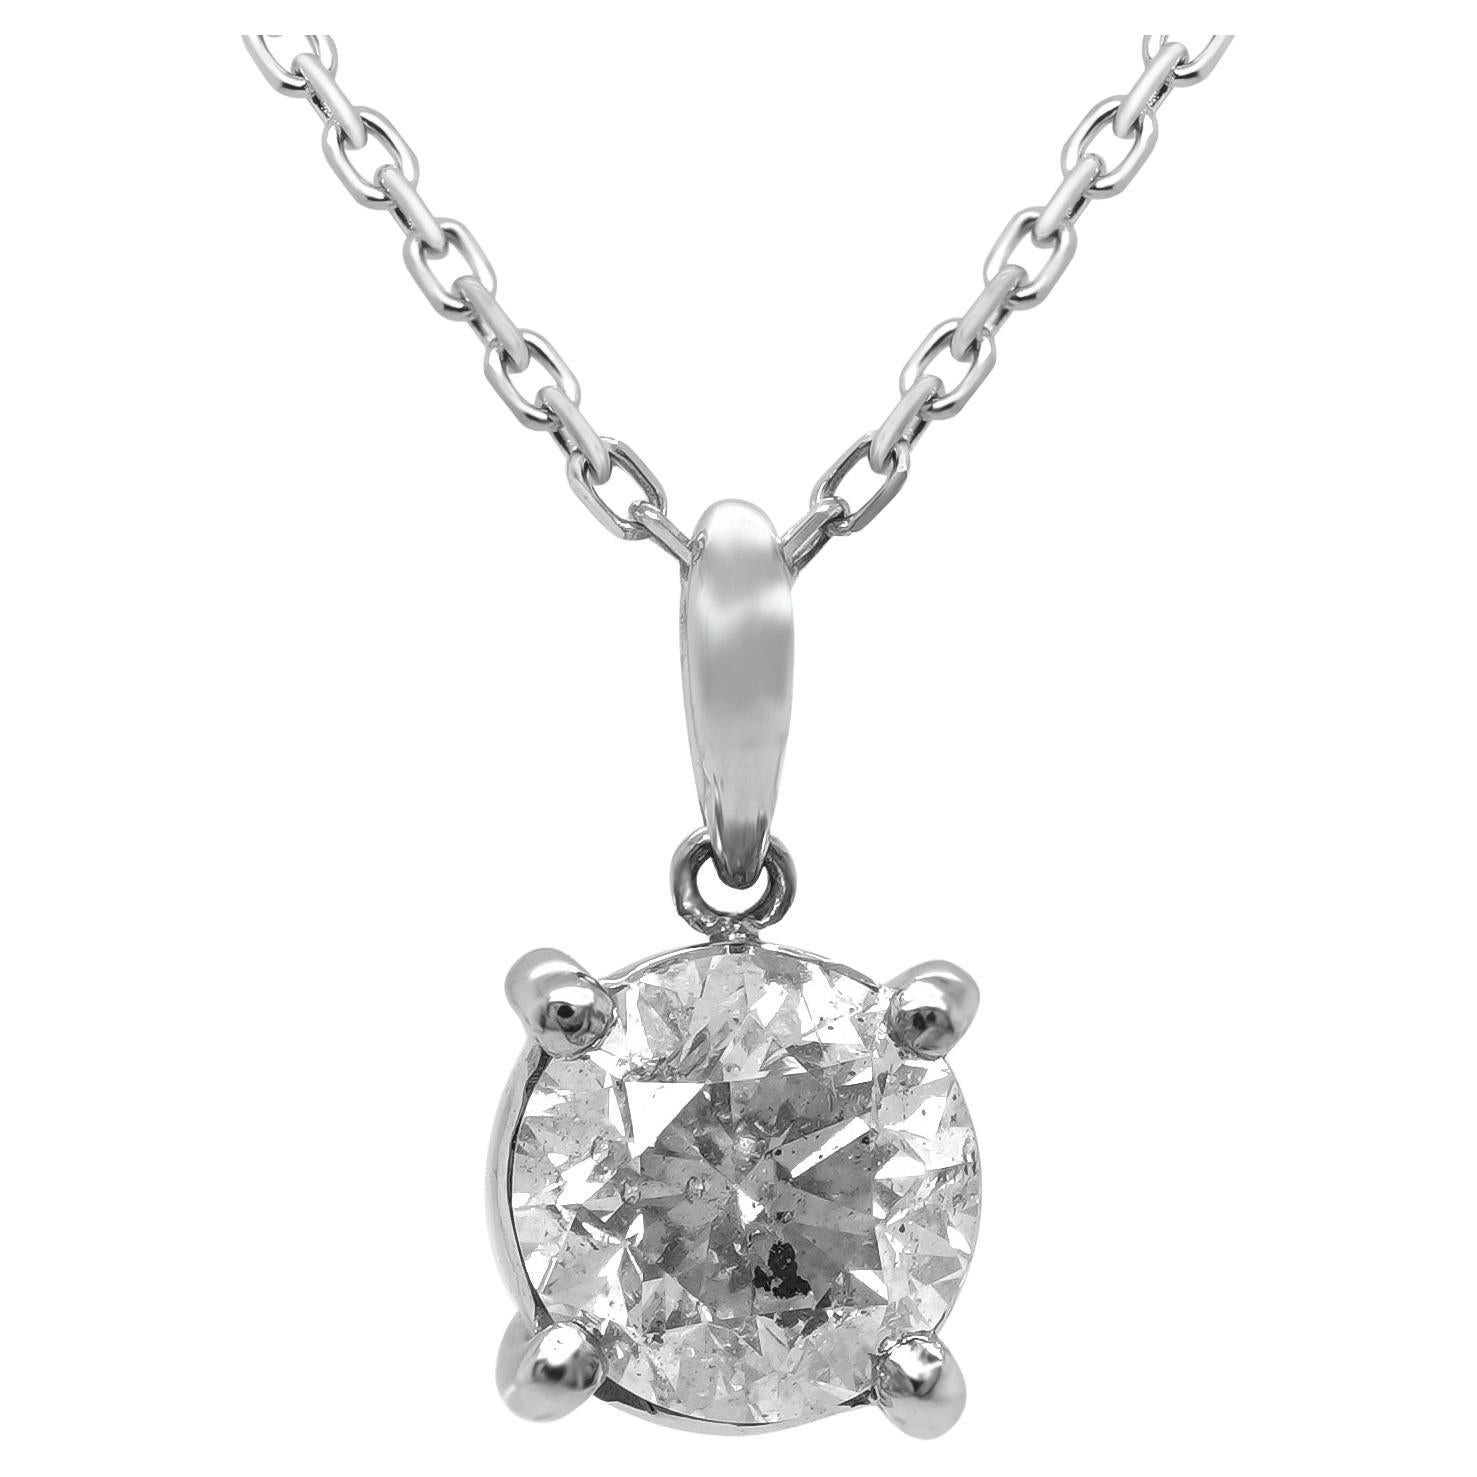 Certified F Color Solitaire Necklace PT 900 Everyday Reasonable Jewelry For Sale